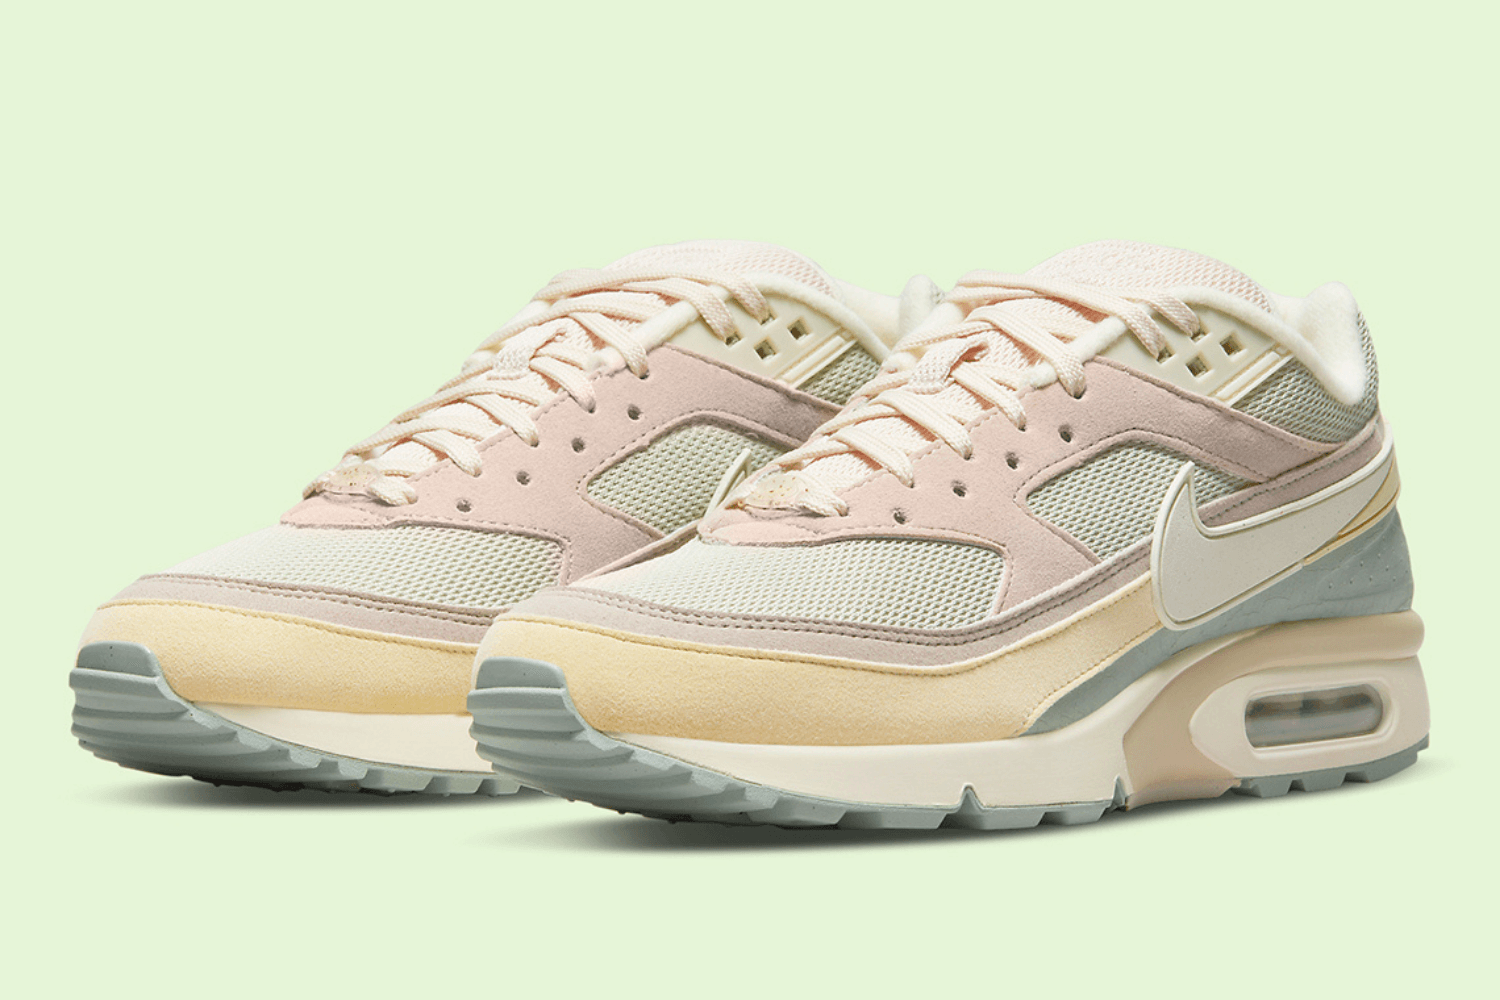 Official images of the Nike Air Max BW 'Light Stone'